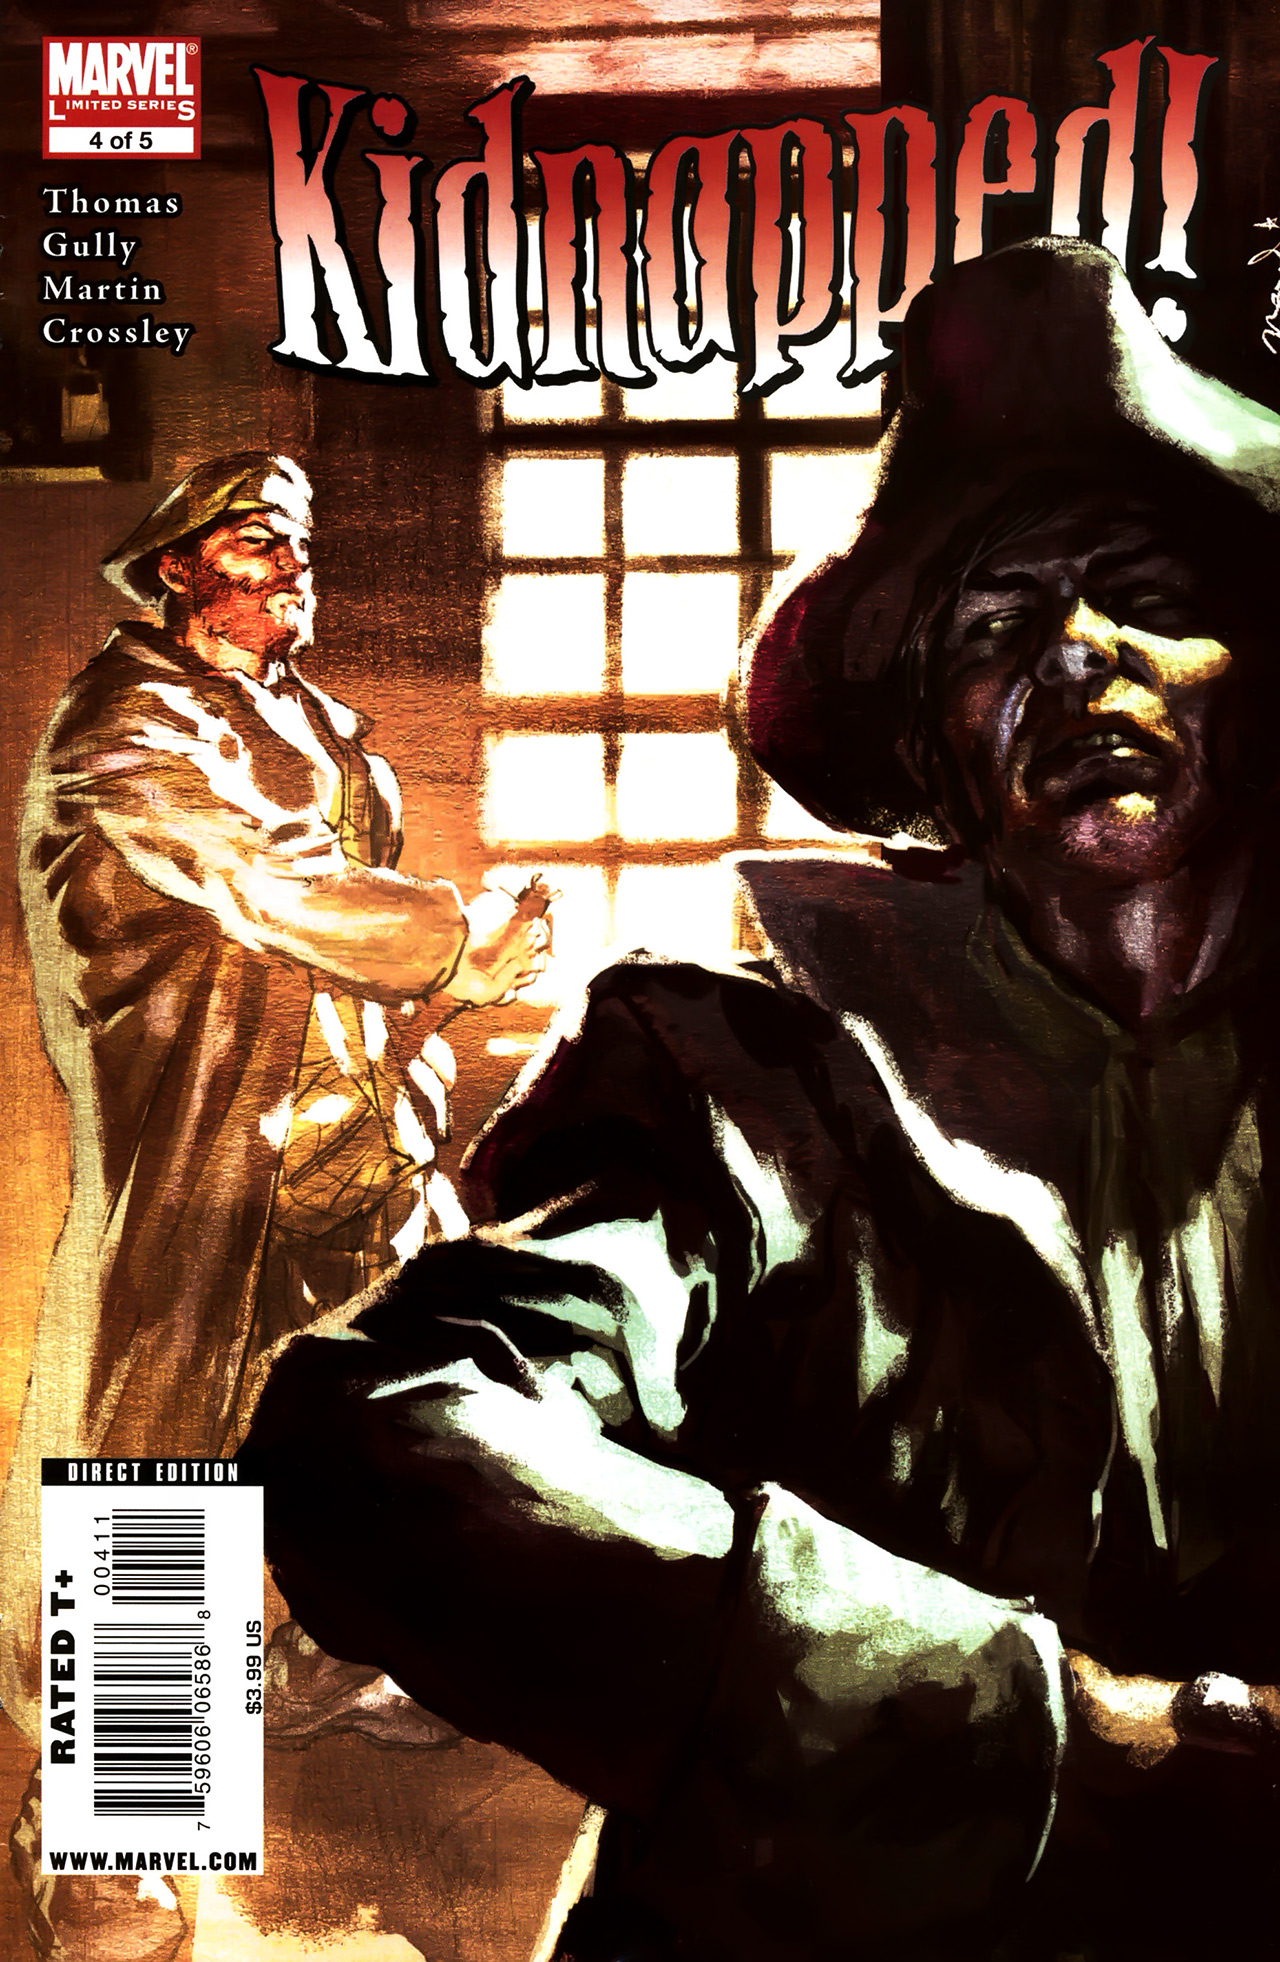 Read online Marvel Illustrated: Kidnapped! comic -  Issue #4 - 1